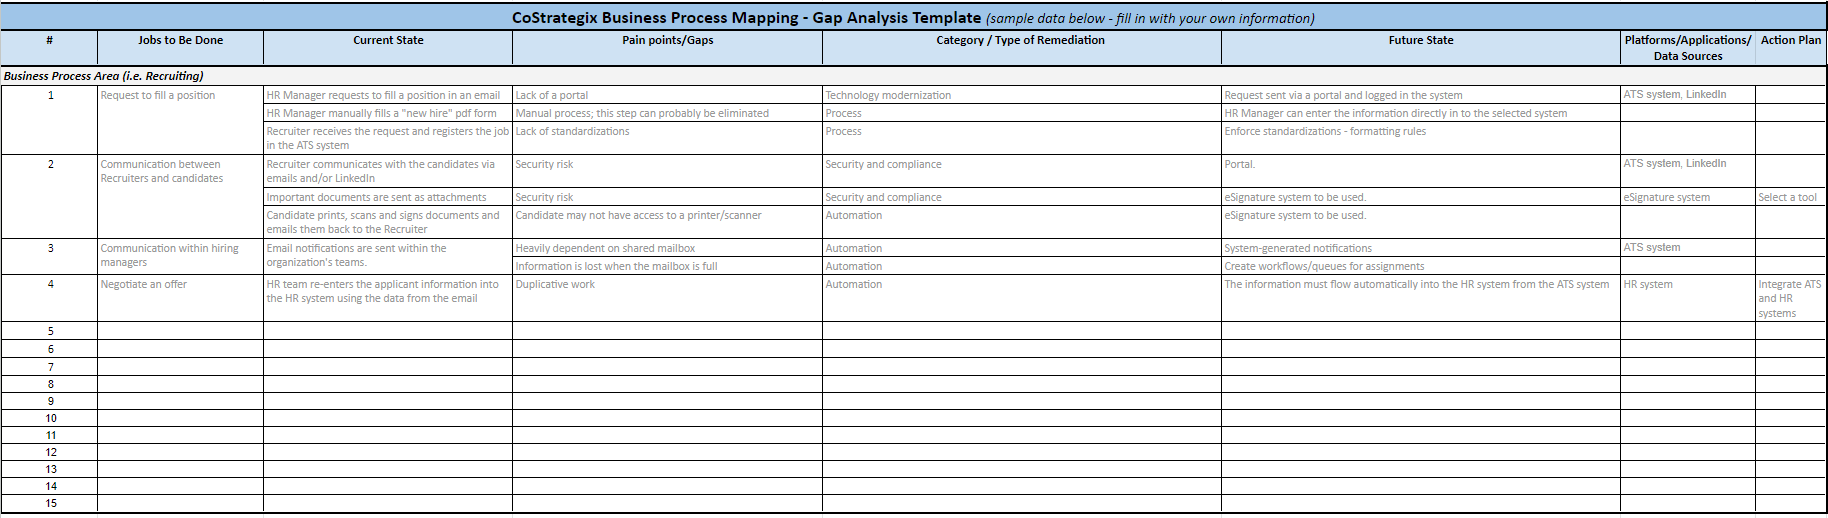 Business Process Mapping - Gap Analysis Template